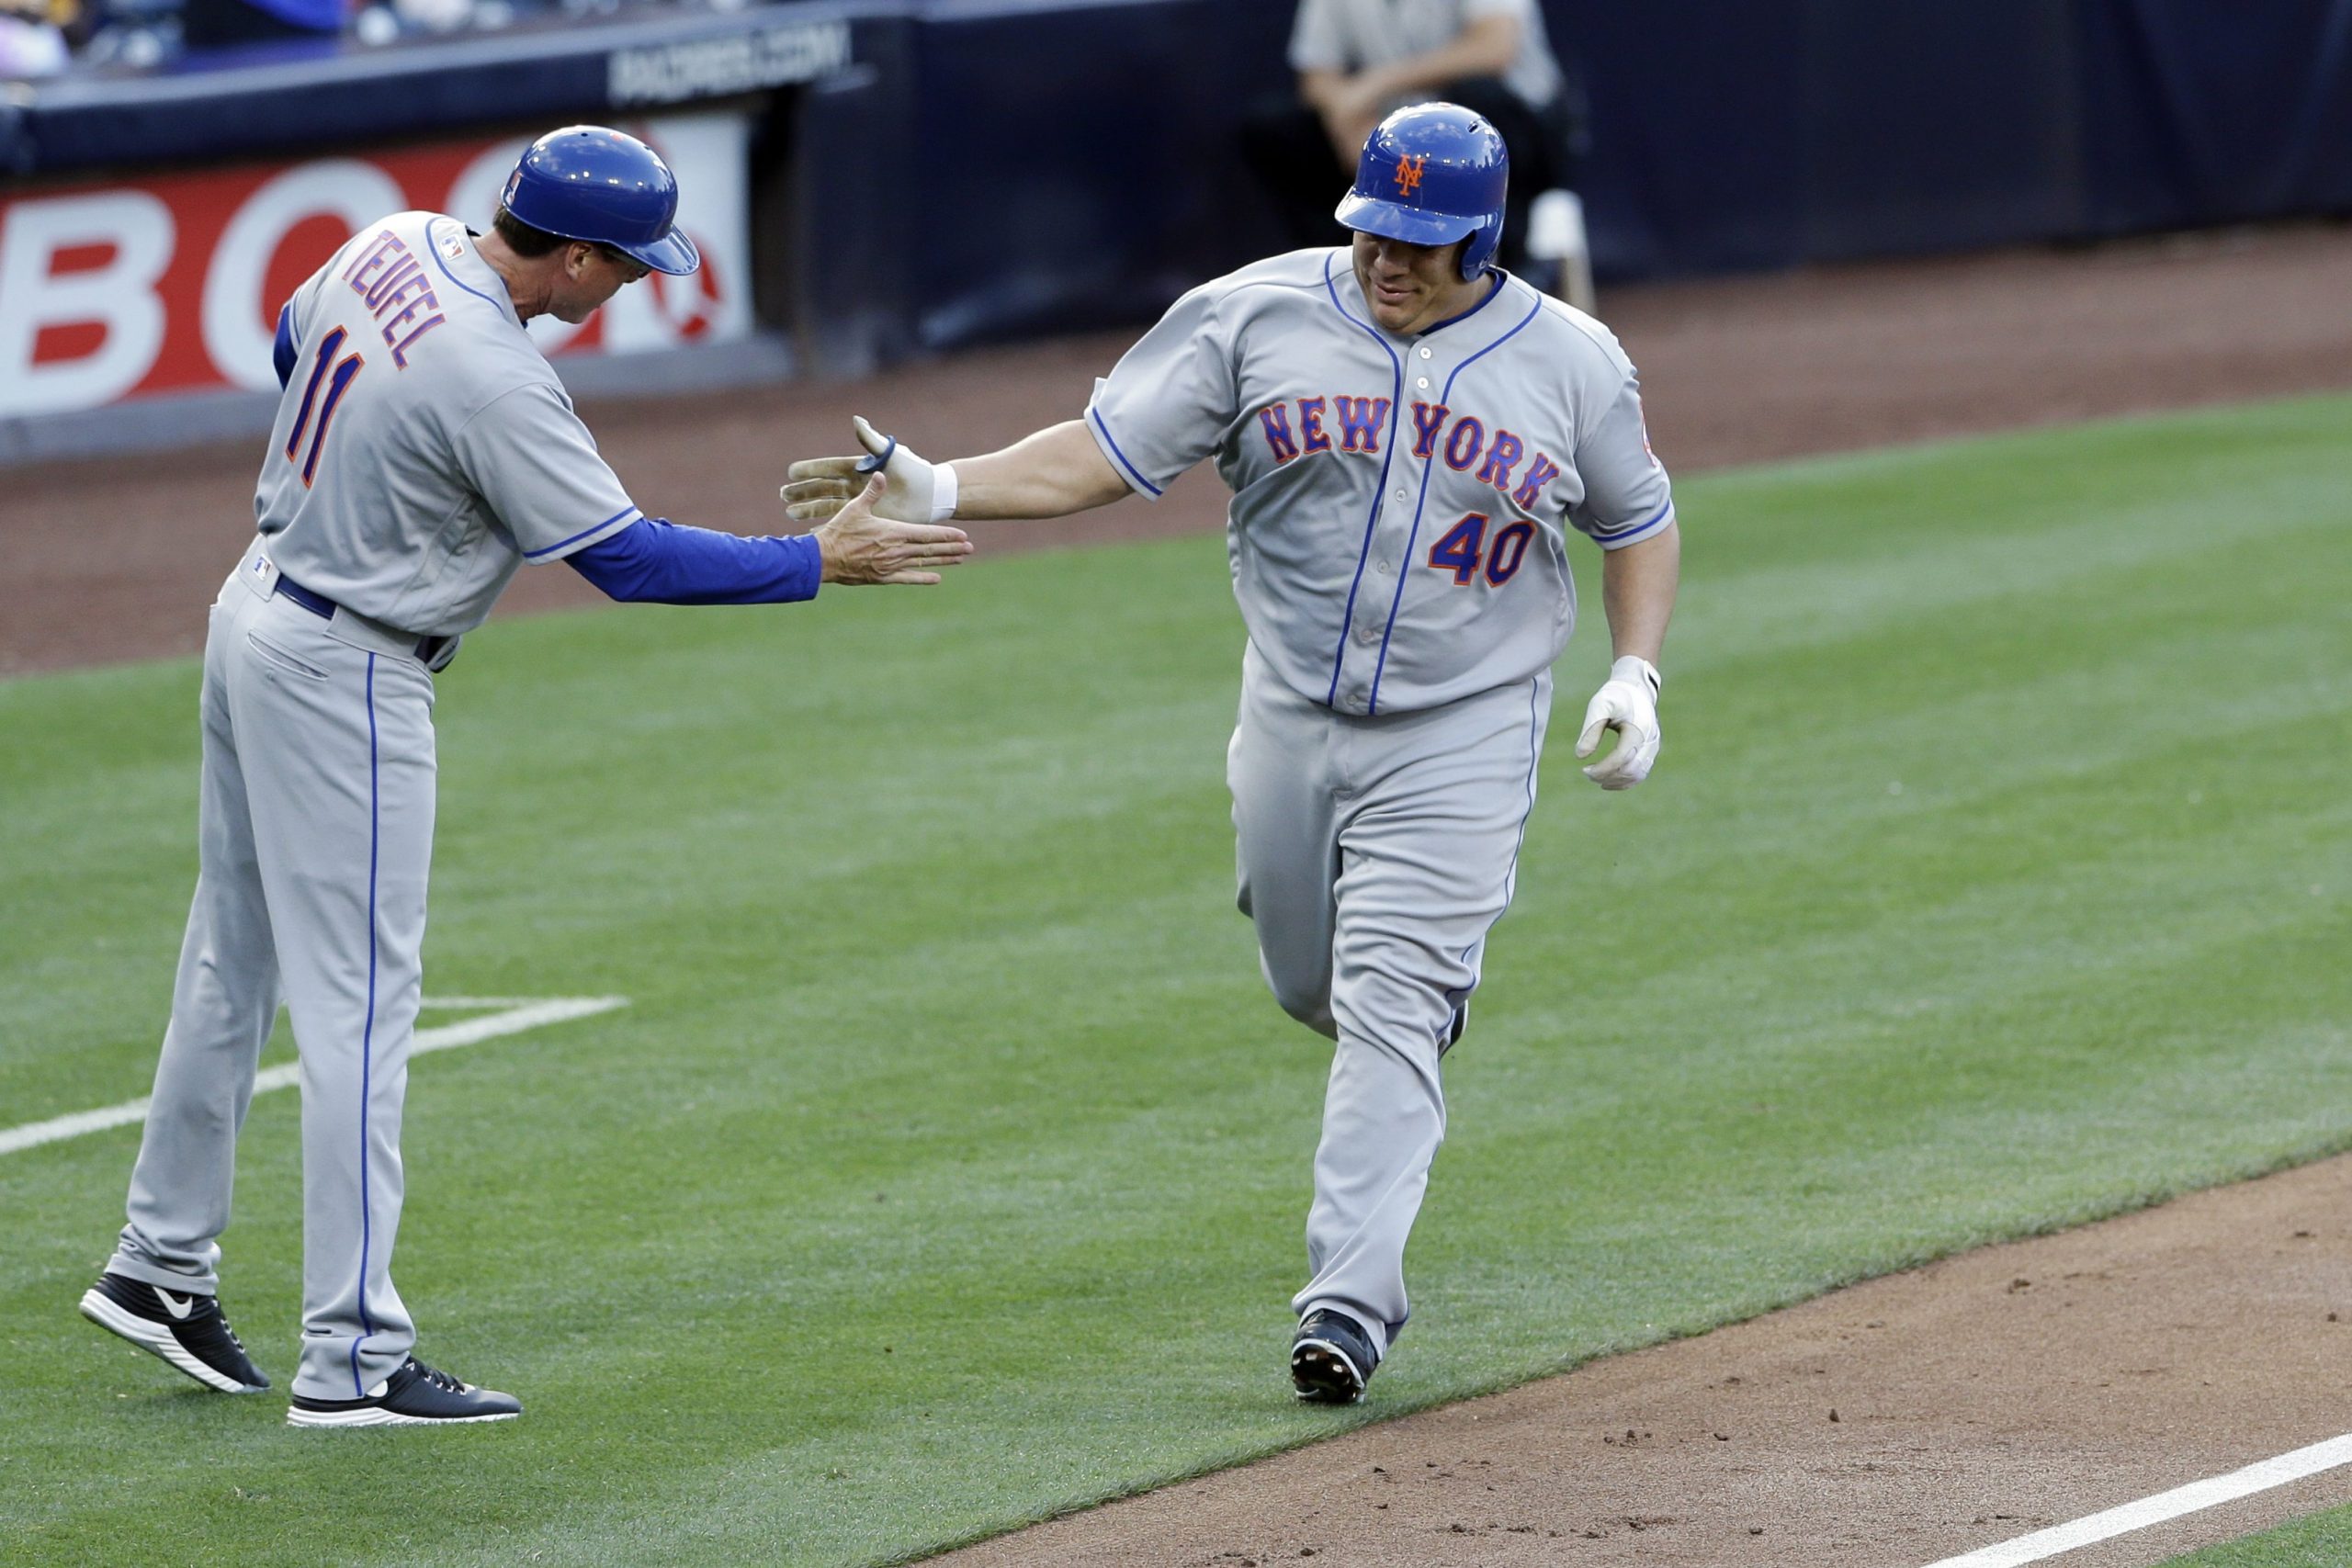 Every Bartolo Colon plate appearance is must-watch television